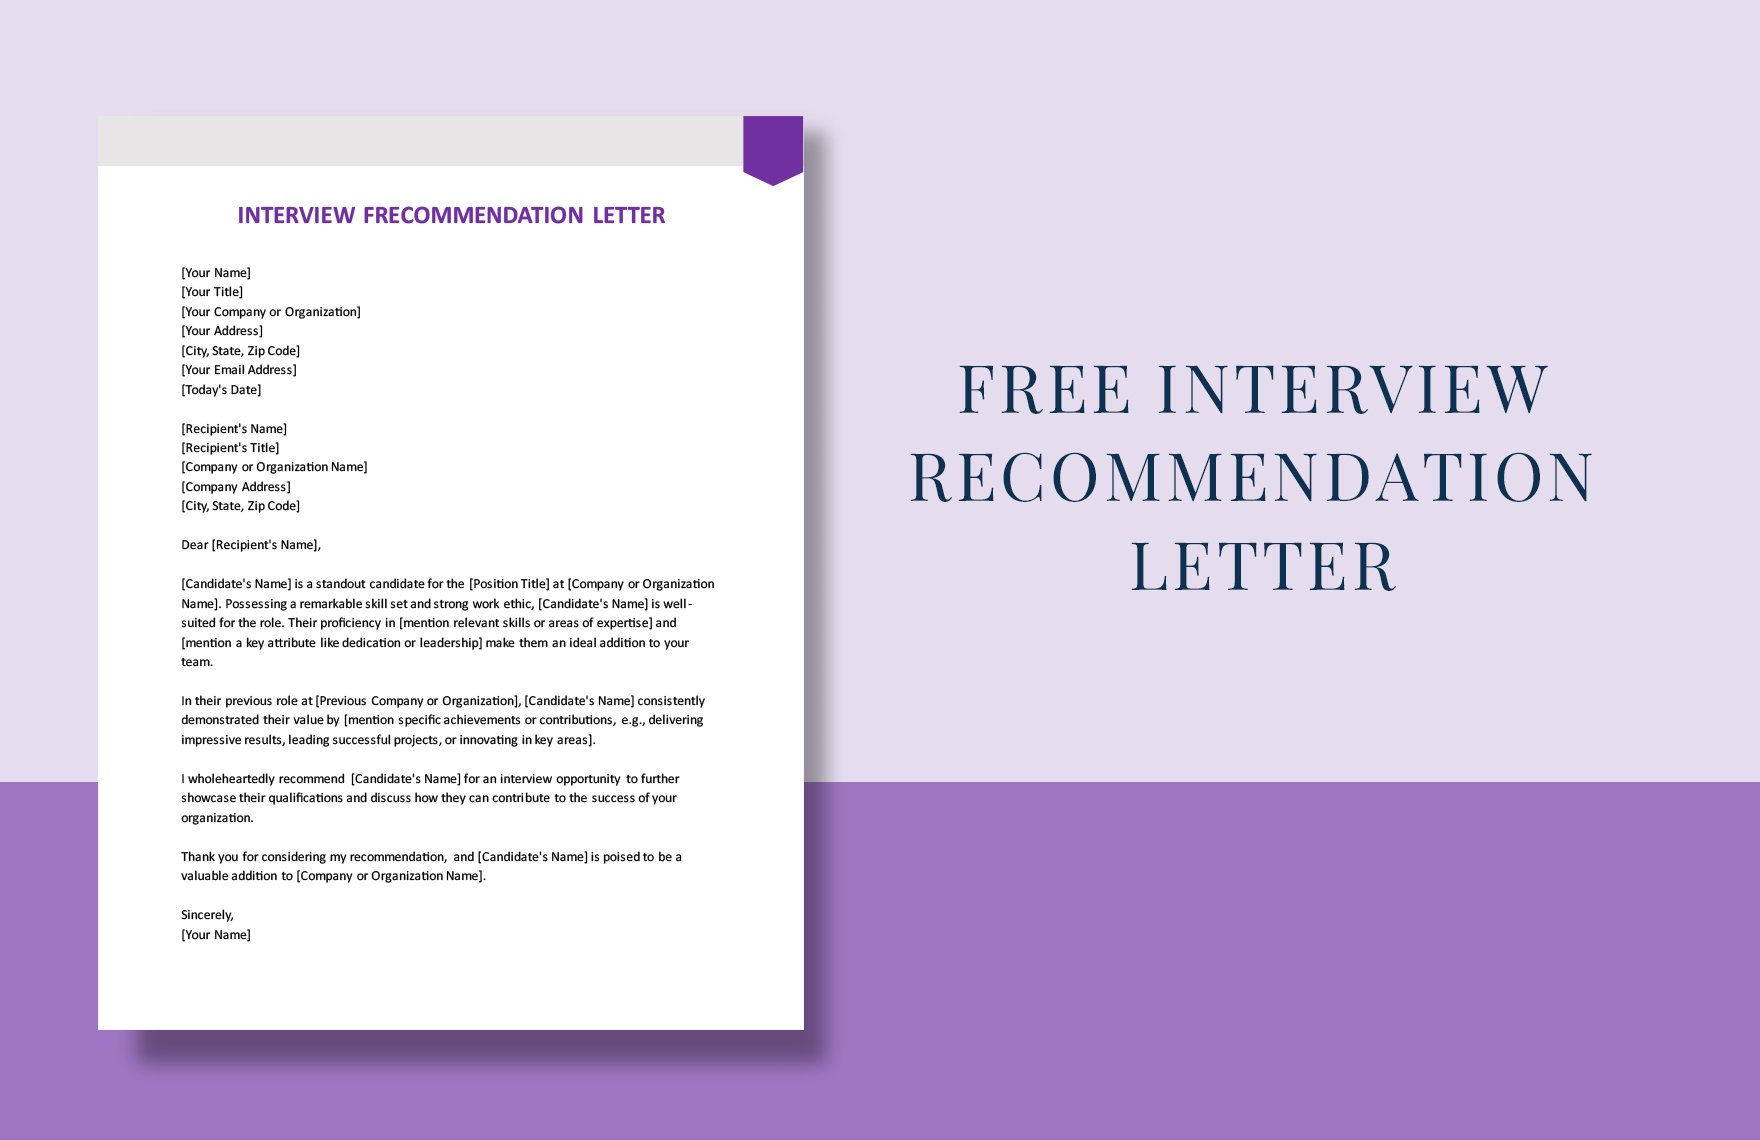 Free Interview Recommendation Letter